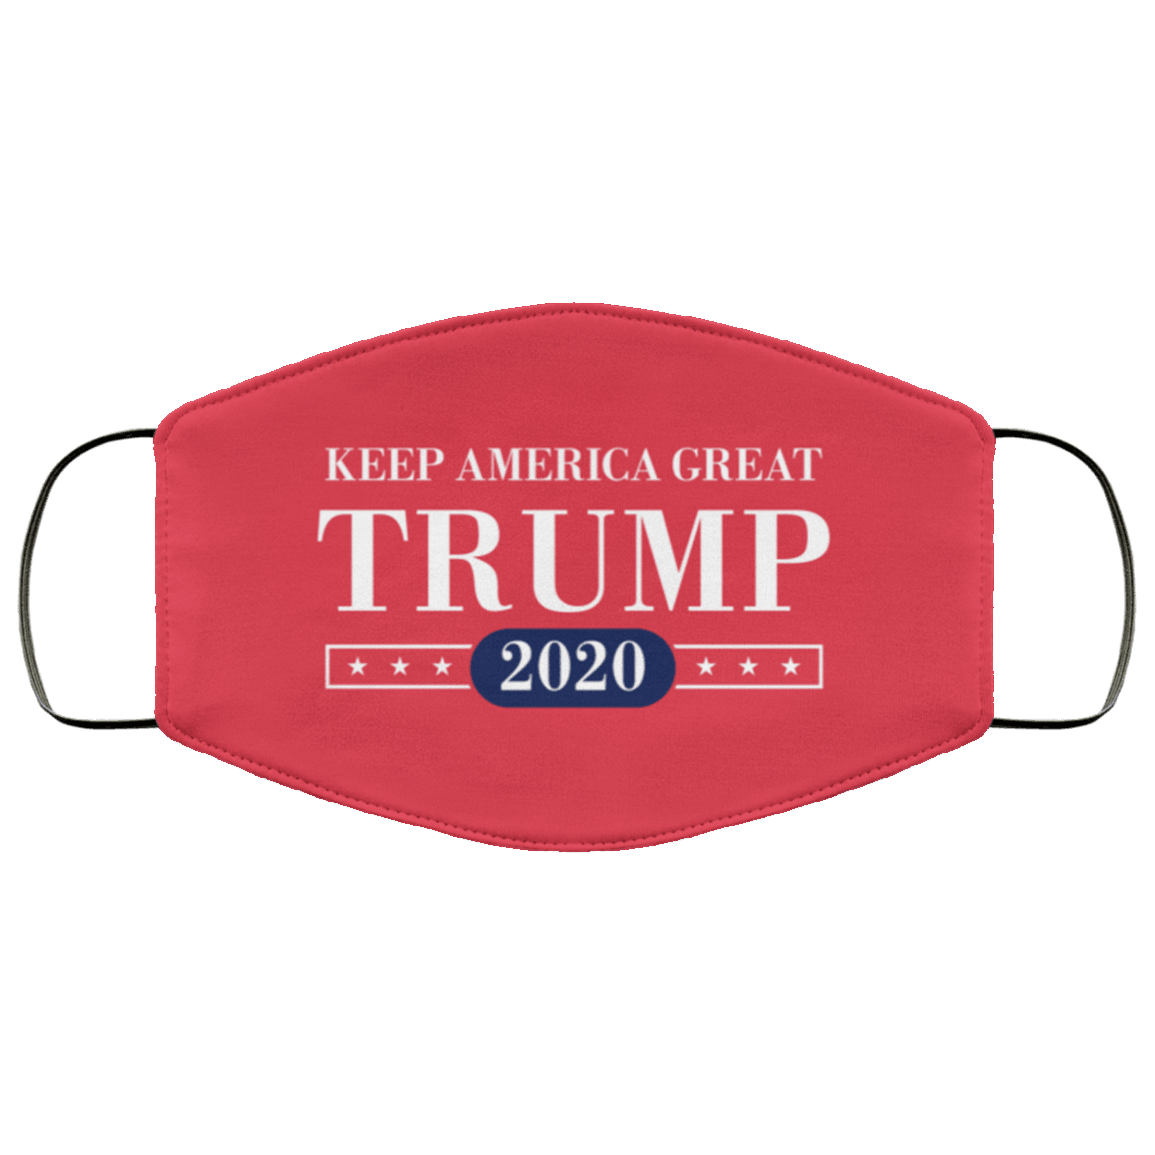 Designs by MyUtopia Shout Out:Keep America Great Trump 2020 Adult Fabric Face Mask with Elastic Ear Loops,3 Layer Fabric Face Mask / Red / Adult,Fabric Face Mask